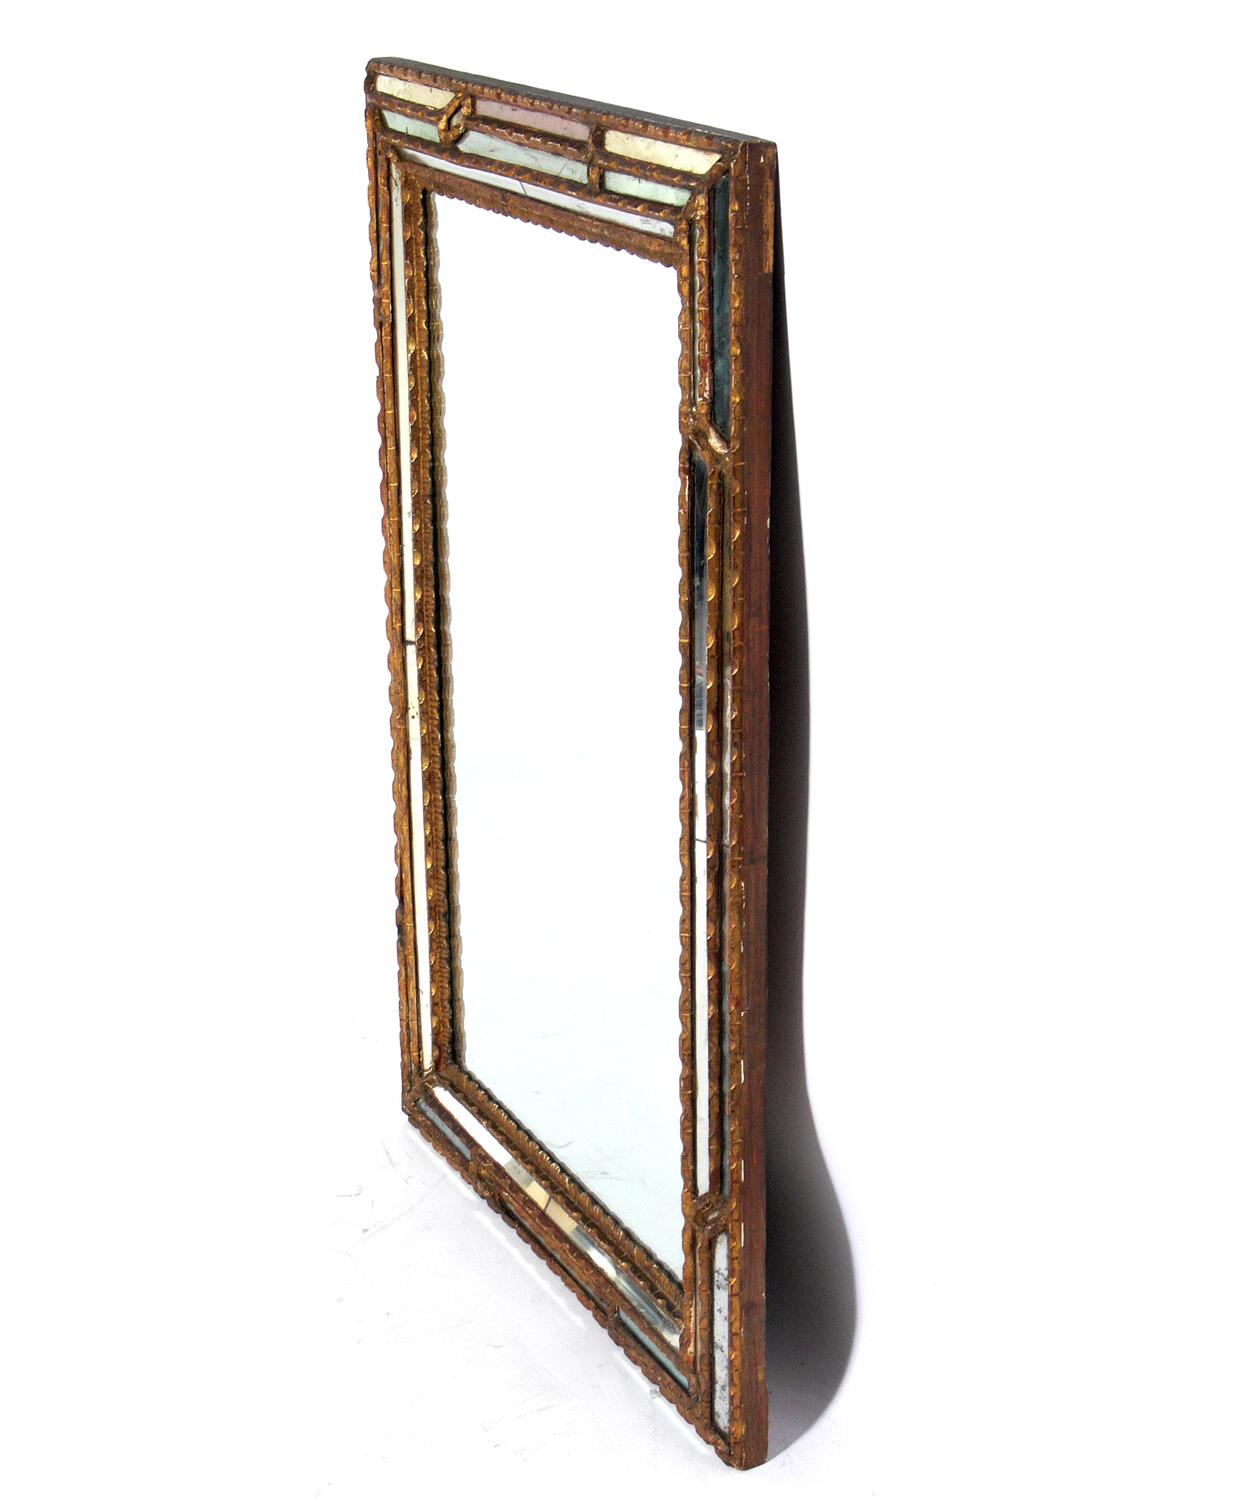 Italian gilt mirror, Italy, circa 1950s. Retains wonderful original patina to both the gilt frame and the mirrored portions.